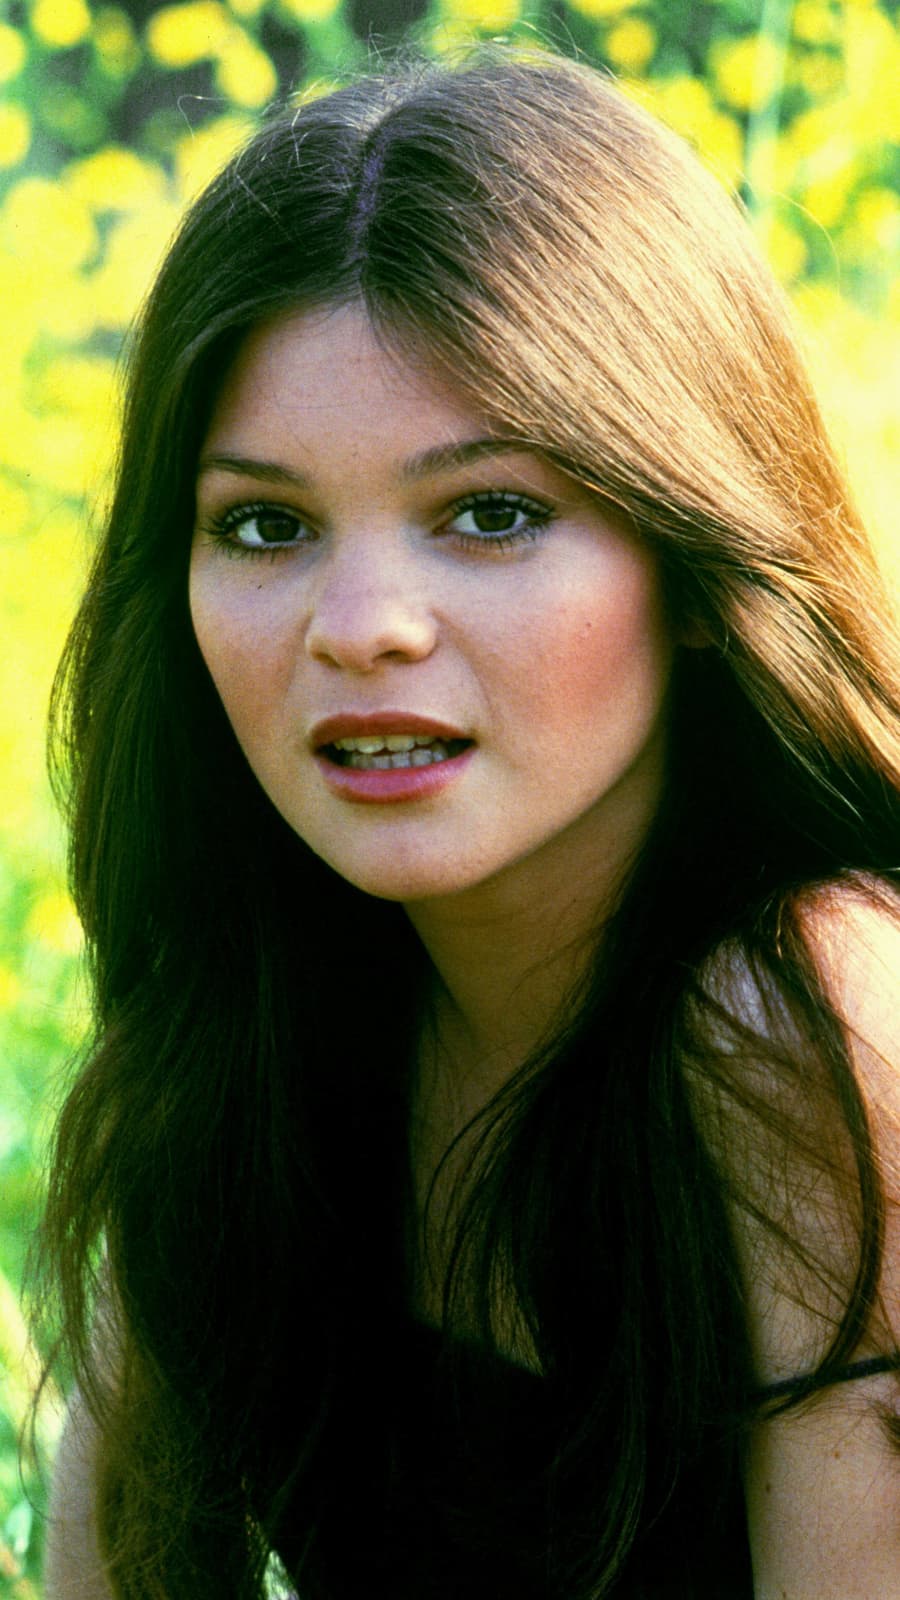 Good morning, Happy Friday. Starting today with a Happy Birthday to VALERIE BERTINELLI 